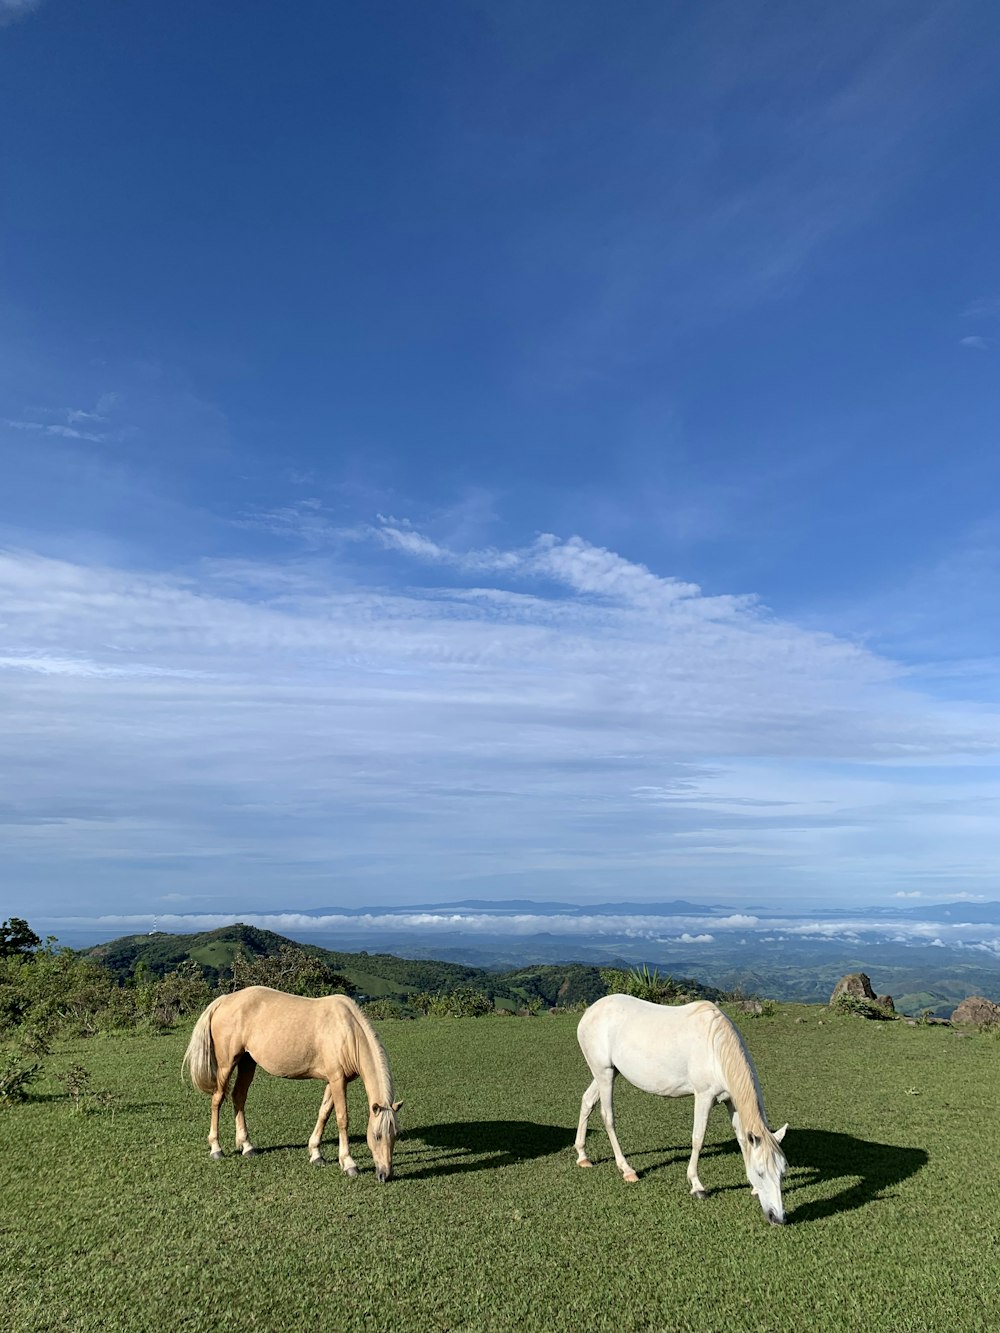 two horses grazing on a lush green field